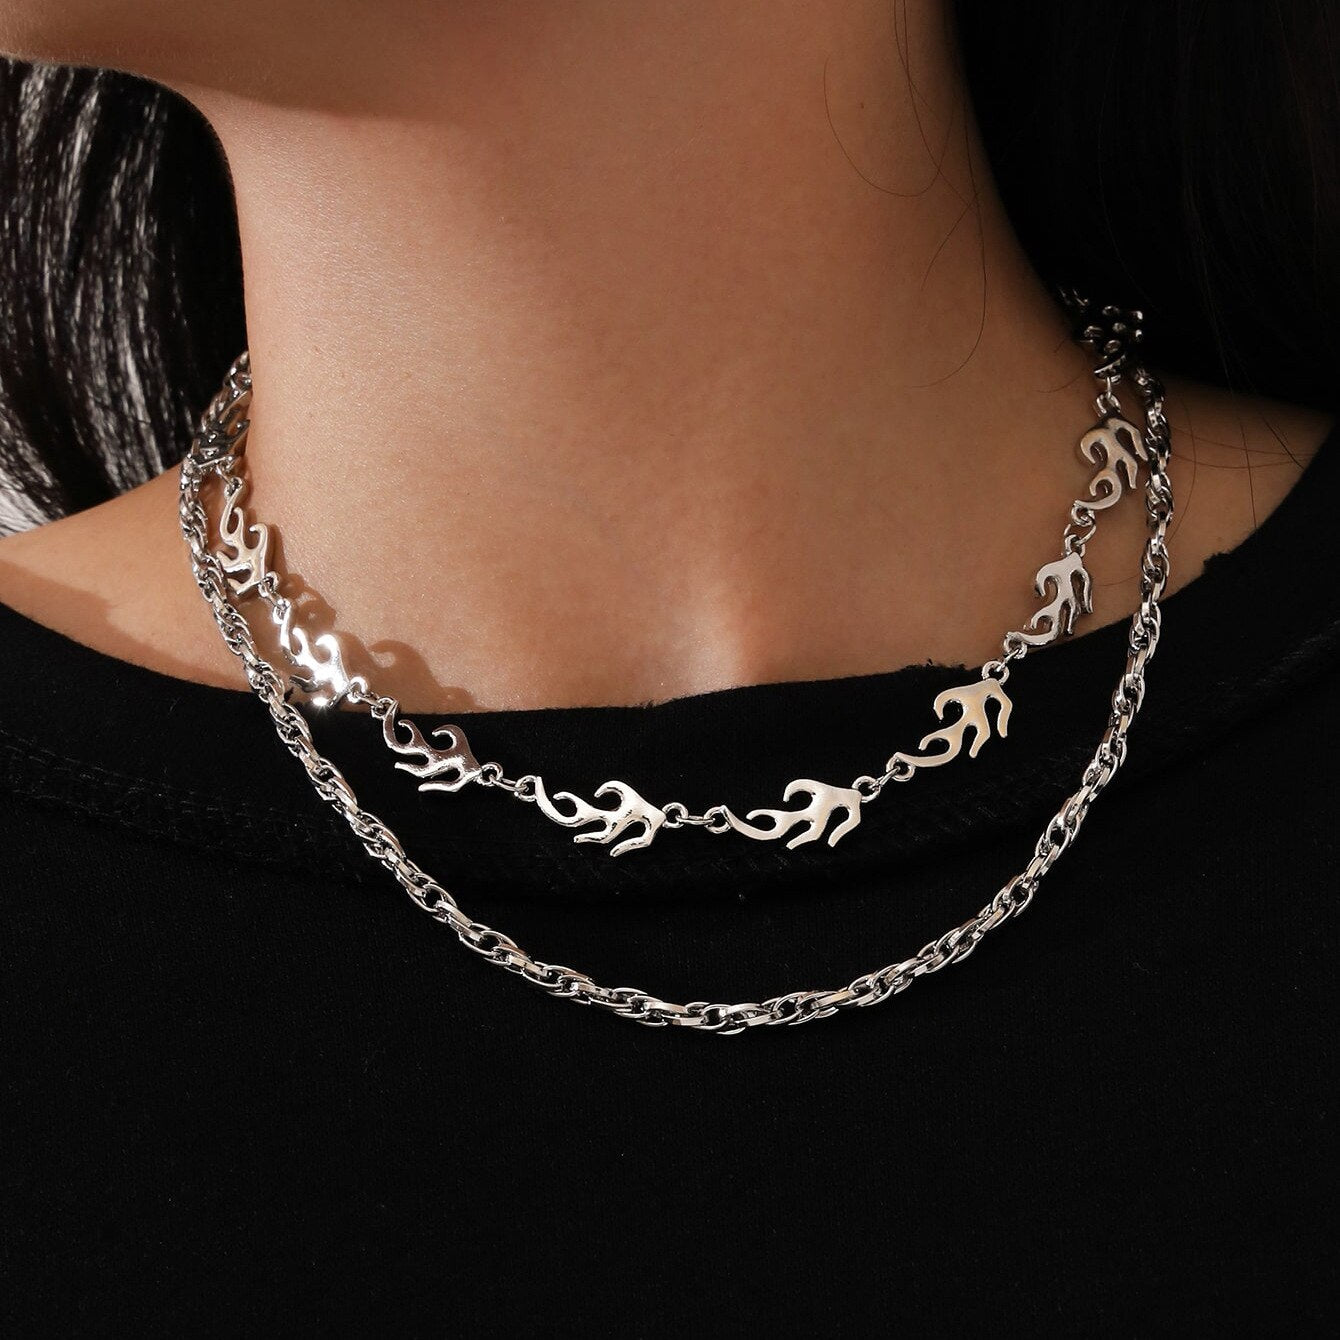 2022 New Brambles Unisex Choker Necklace Women Hip-hop Gothic Punk Style Barbed Wire Thorns Pendant Chain Valentine's Day Gifts - Etyn Online {{ product_tag }}